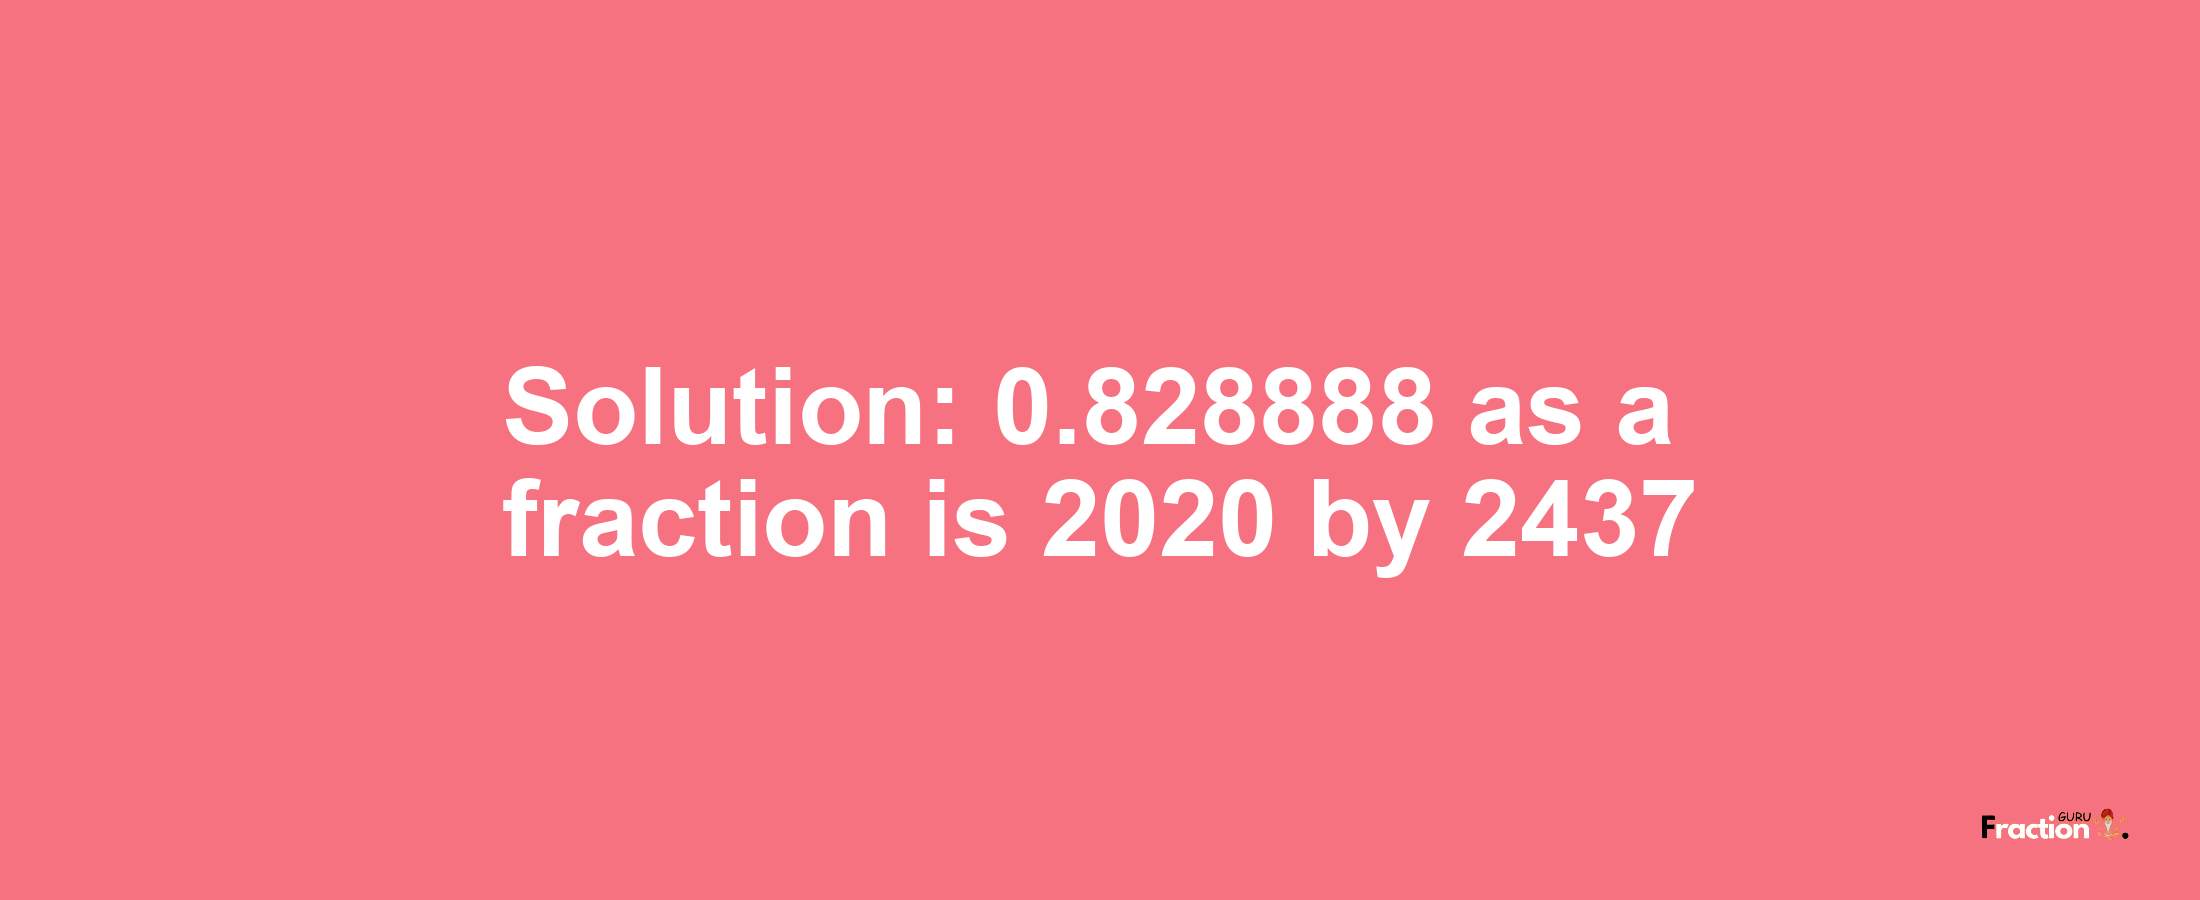 Solution:0.828888 as a fraction is 2020/2437